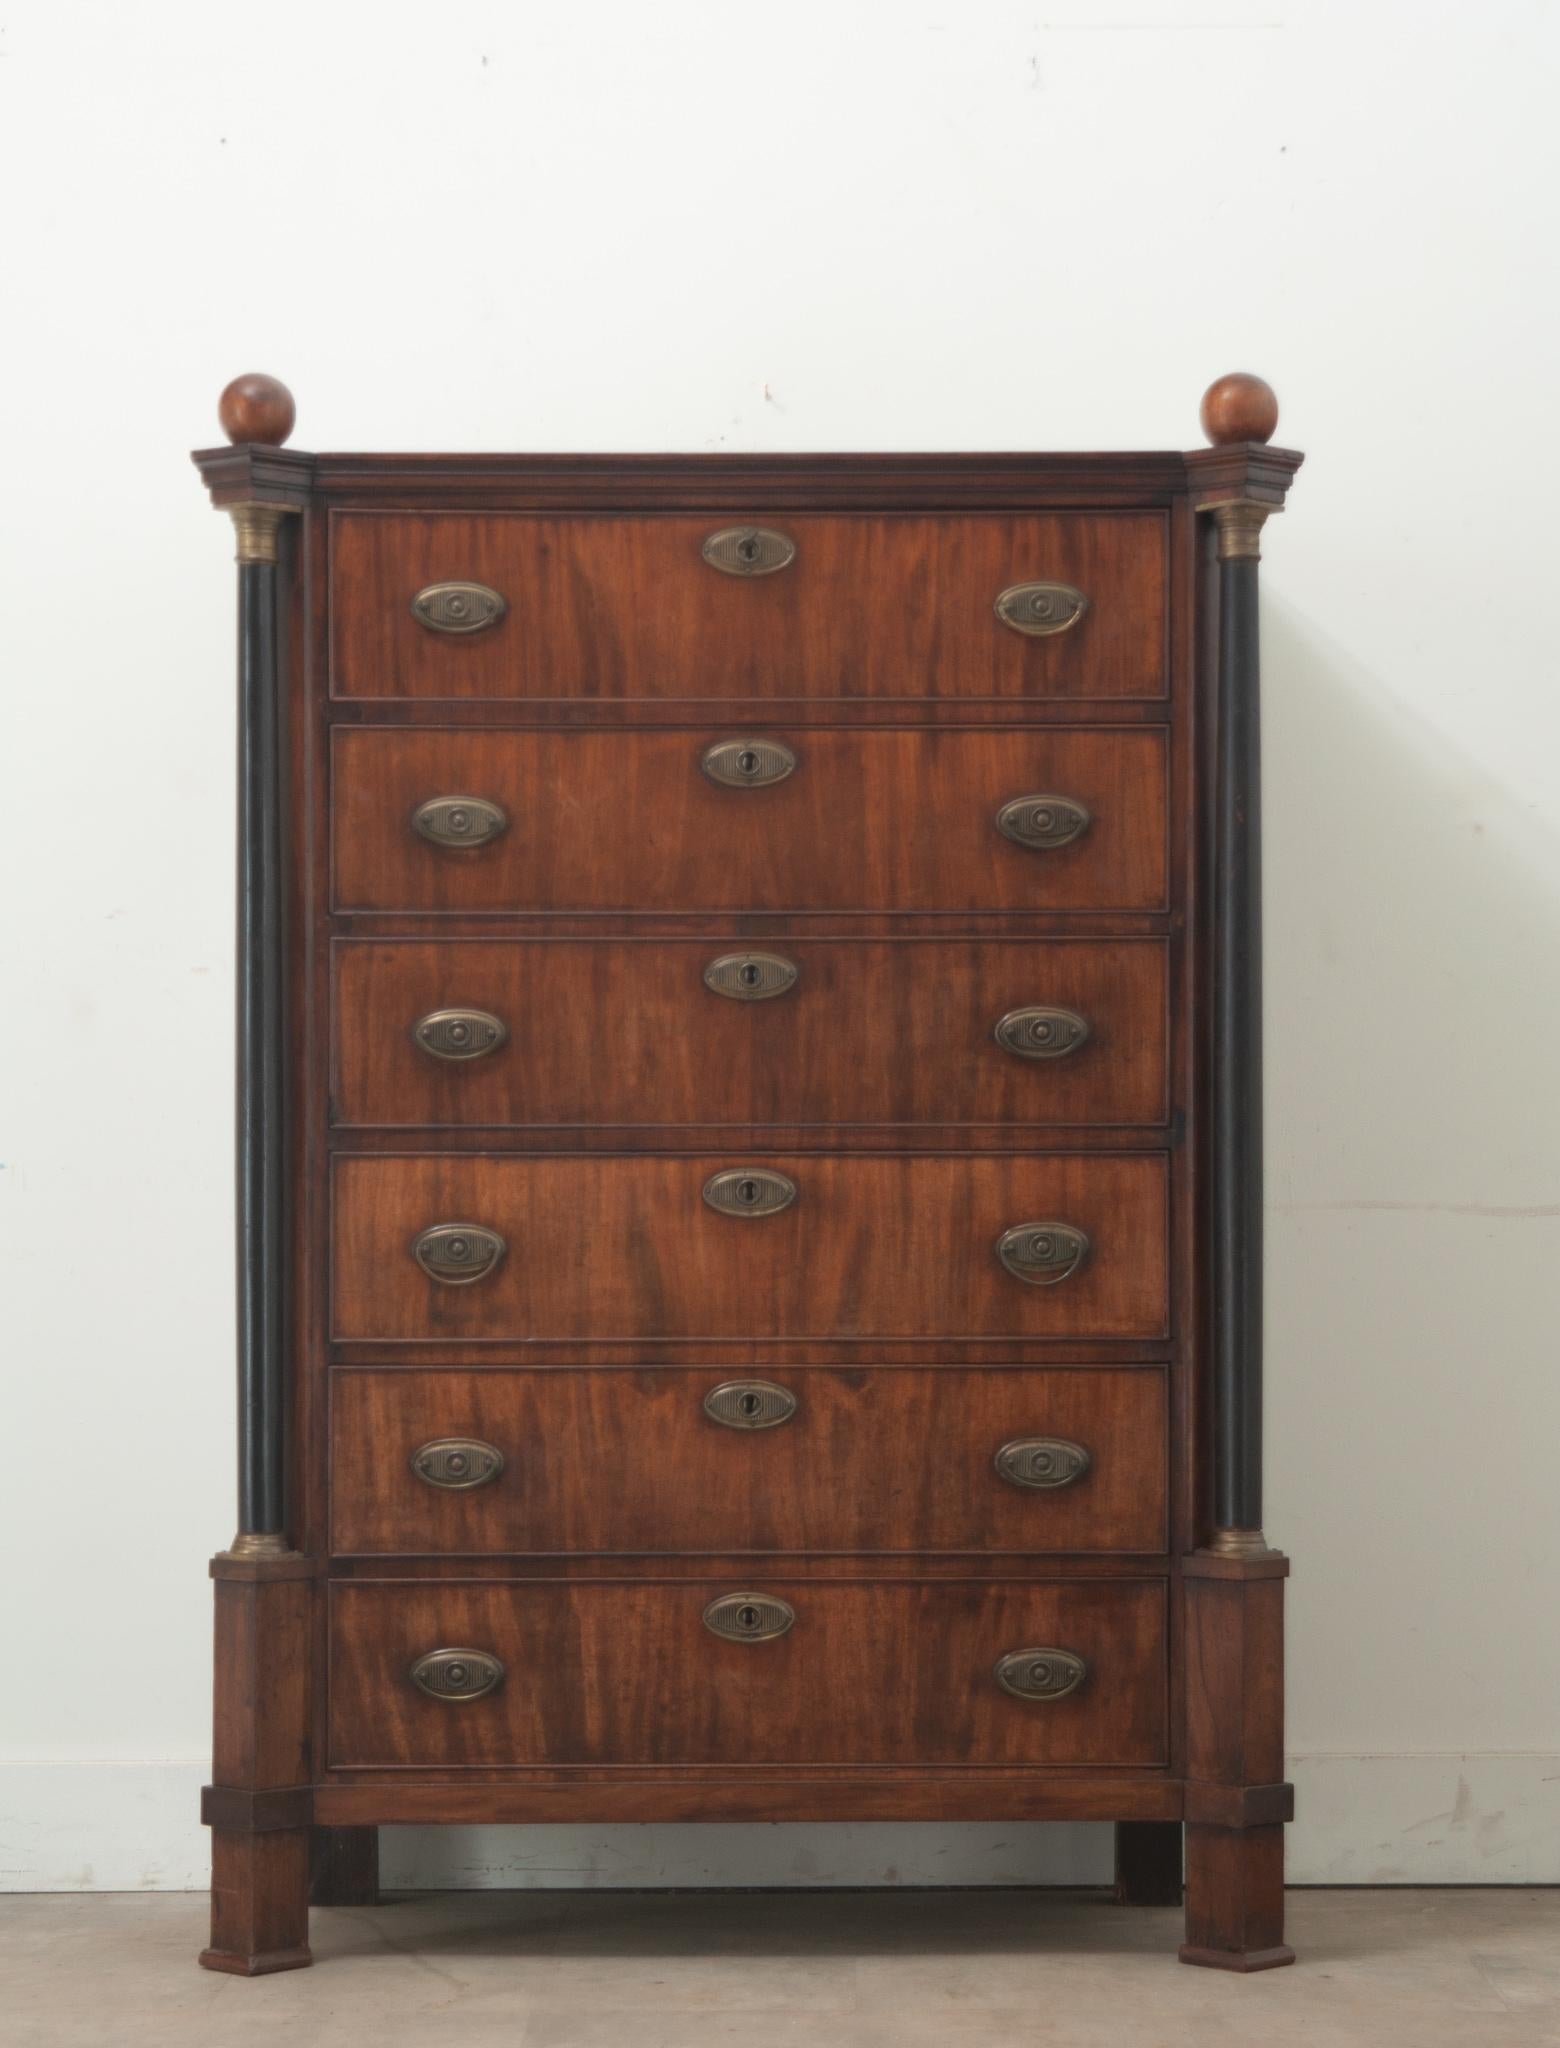 A tall Dutch Empire style chest made of mahogany and ebonized wood during the 1800’s. This mahogany case piece has six bookmatched drawer fronts each with two ring drawer pulls for easy accessibility. Ebonized columns topped with ball finials flank